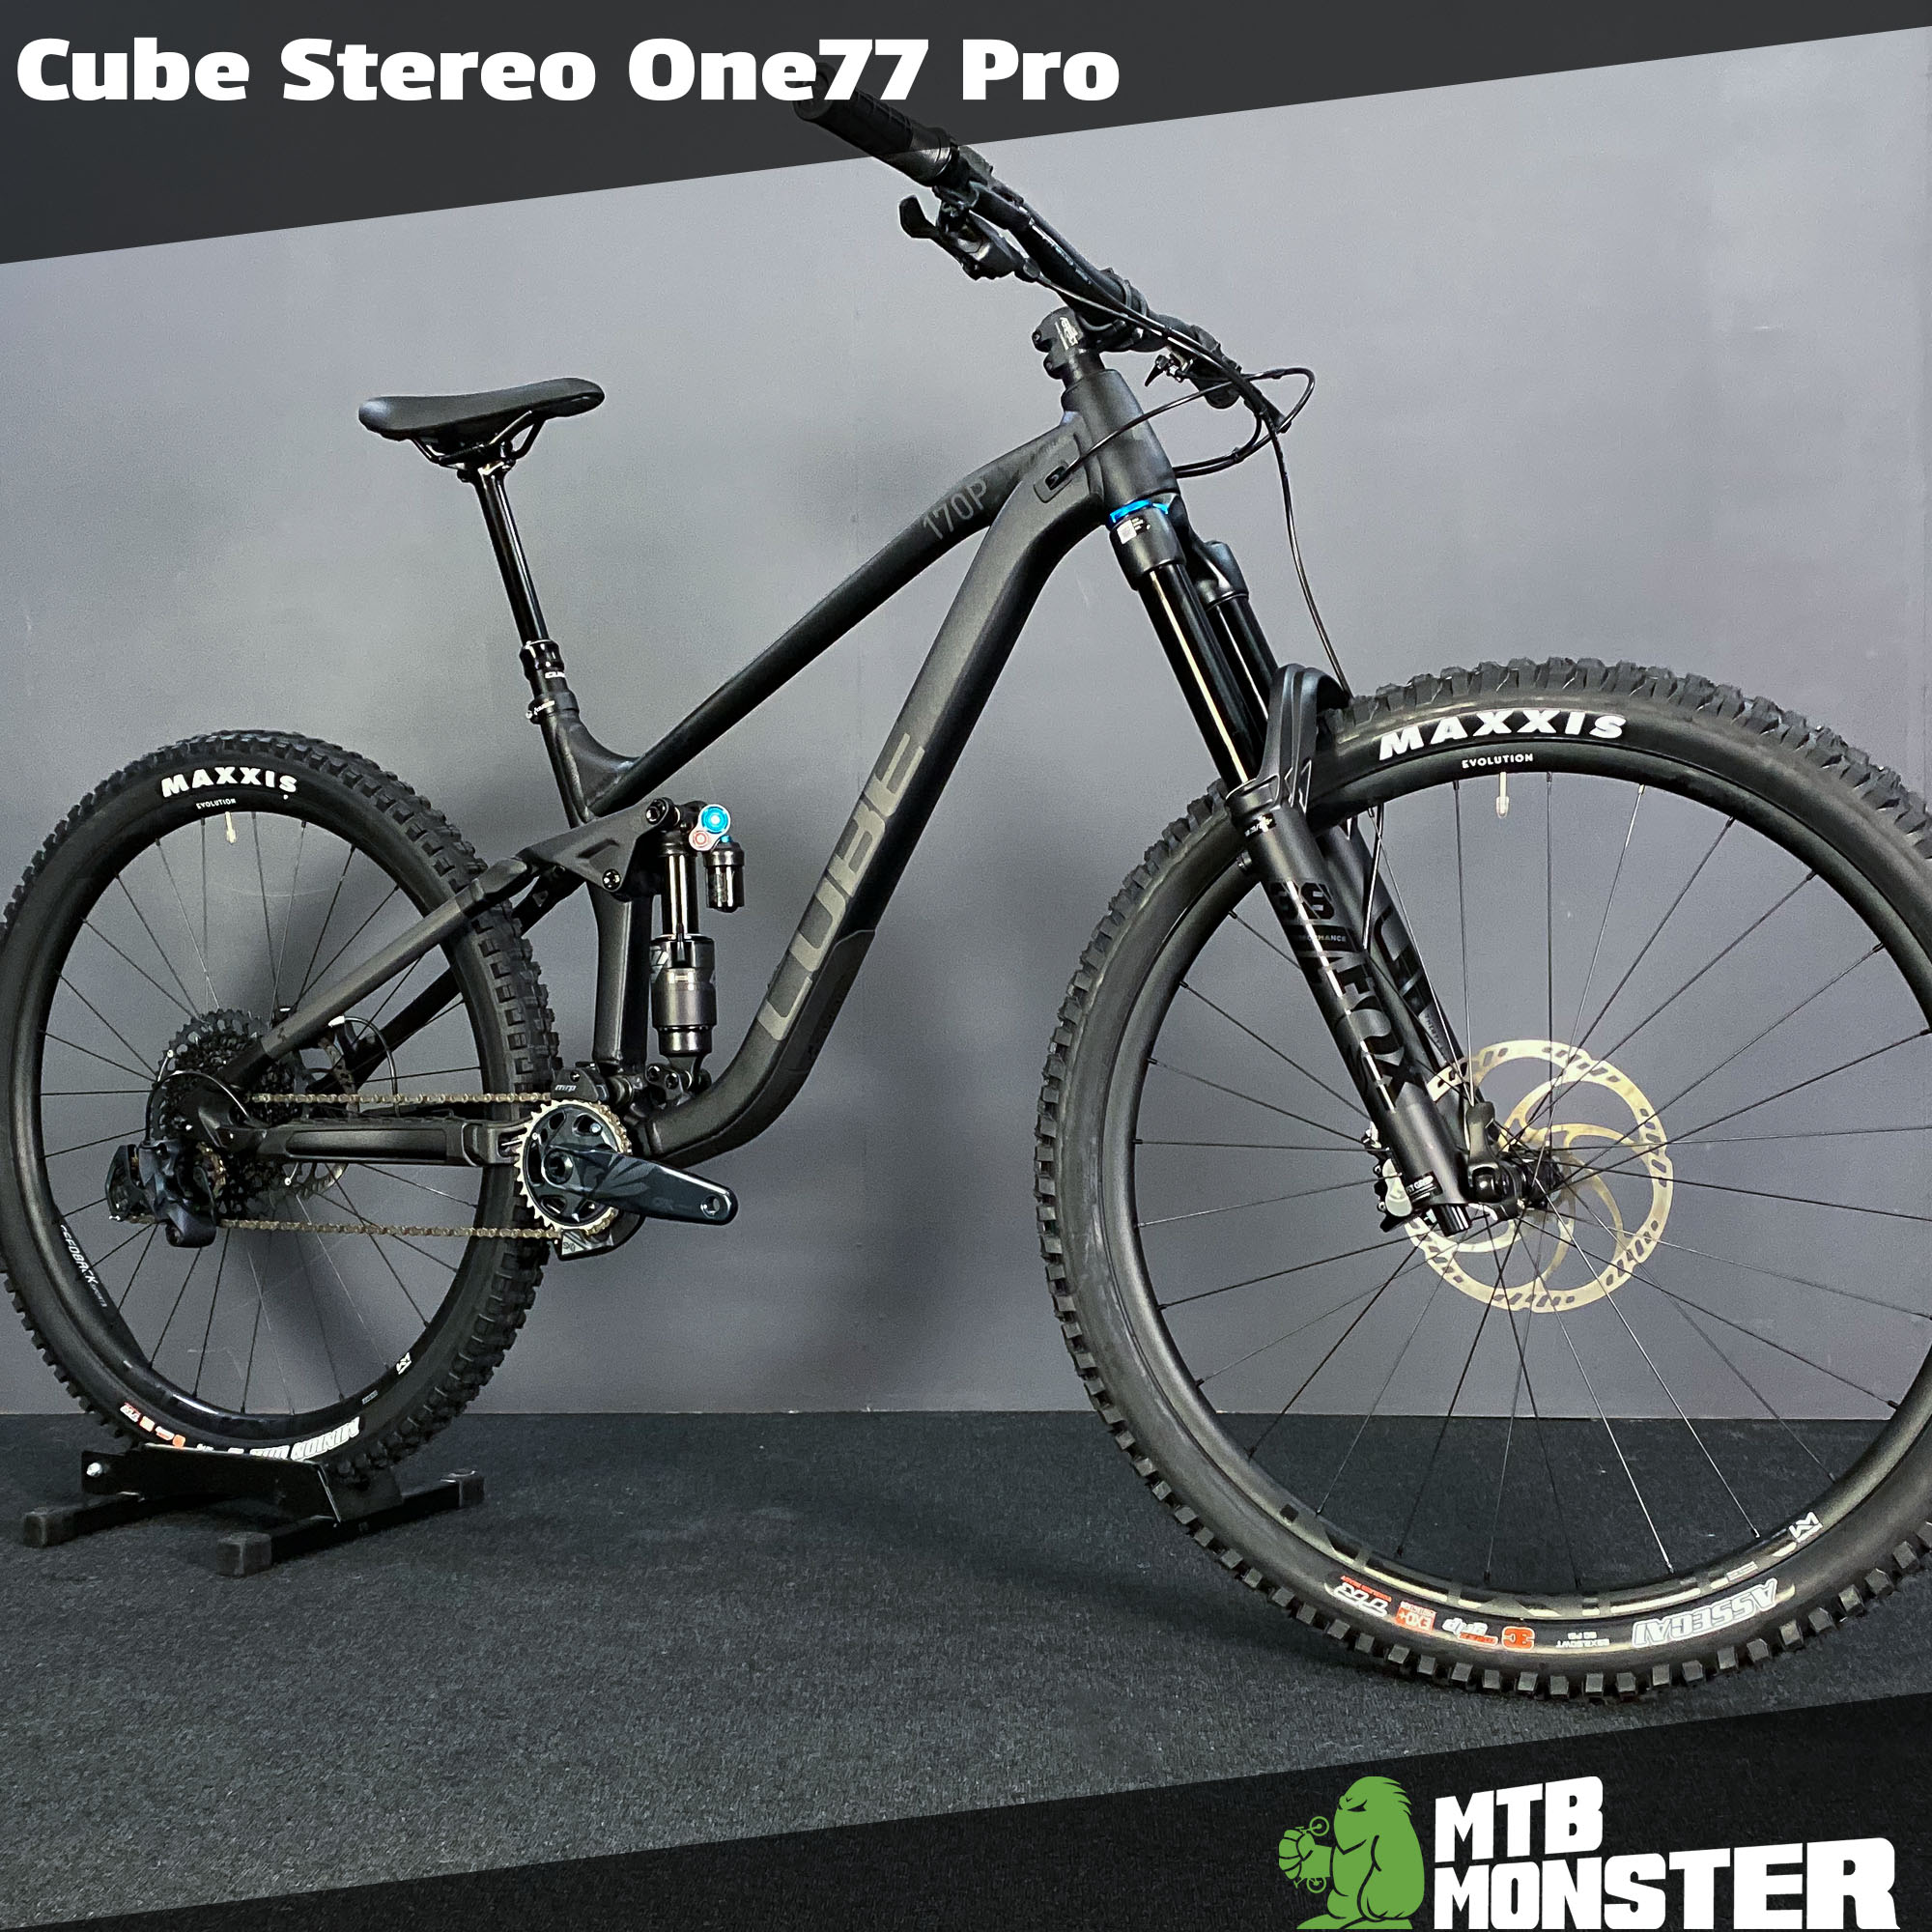 Cube Stereo One77 Pro